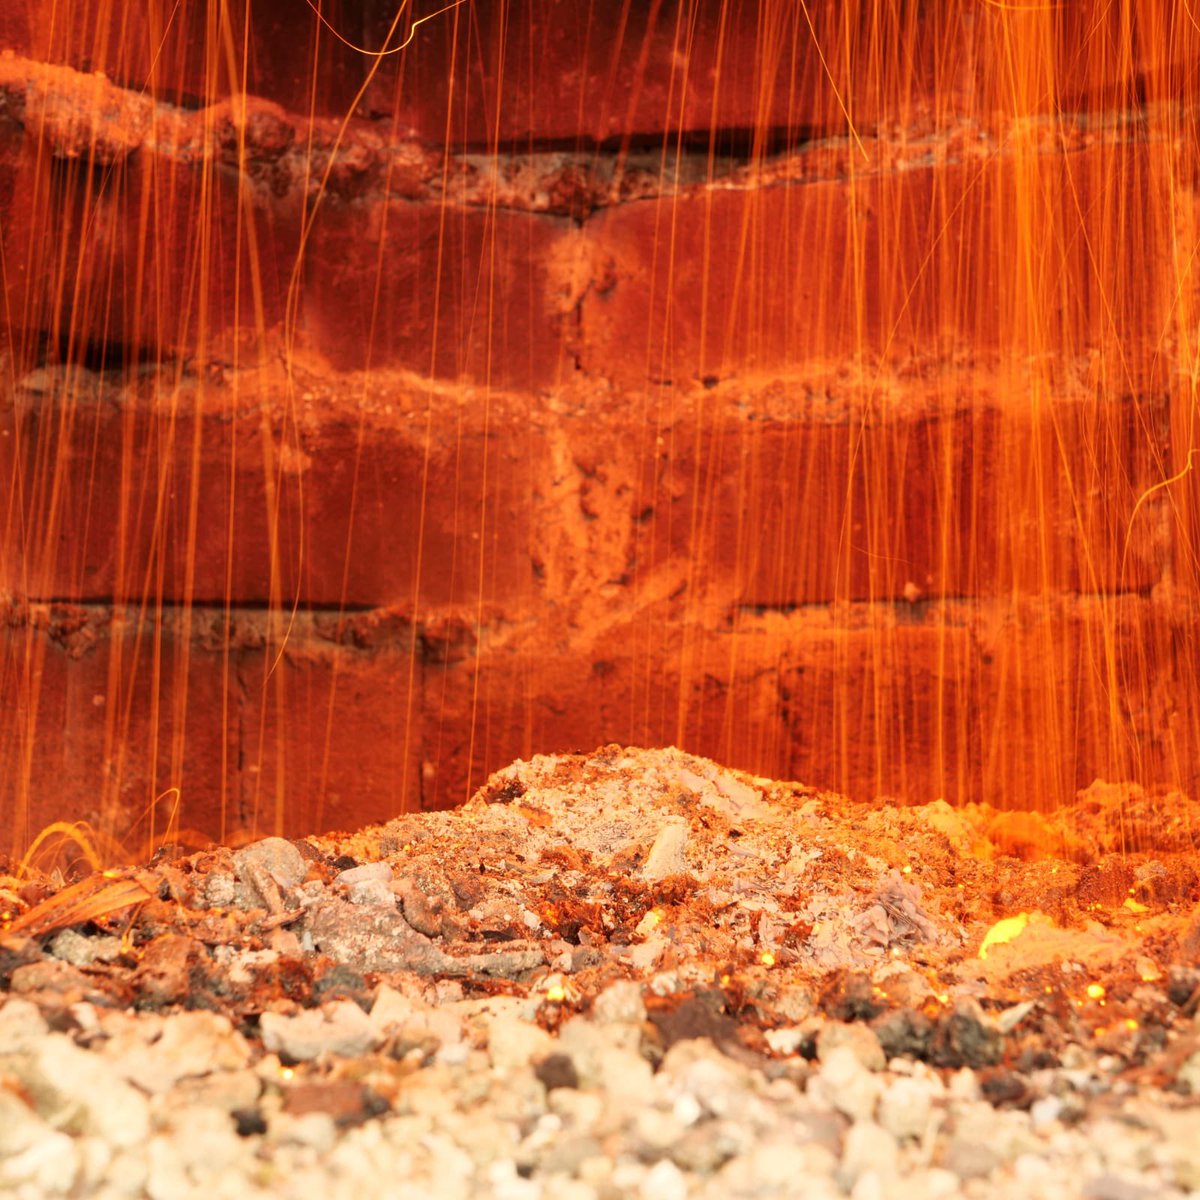 Impurities within the clay ‘stain’ the brick to change the colour or give a brindle appearance. Oxidising conditions at 900°C-1000°C turn most bricks red, but above these temperatures the colours darken. :  @danielbridge7/